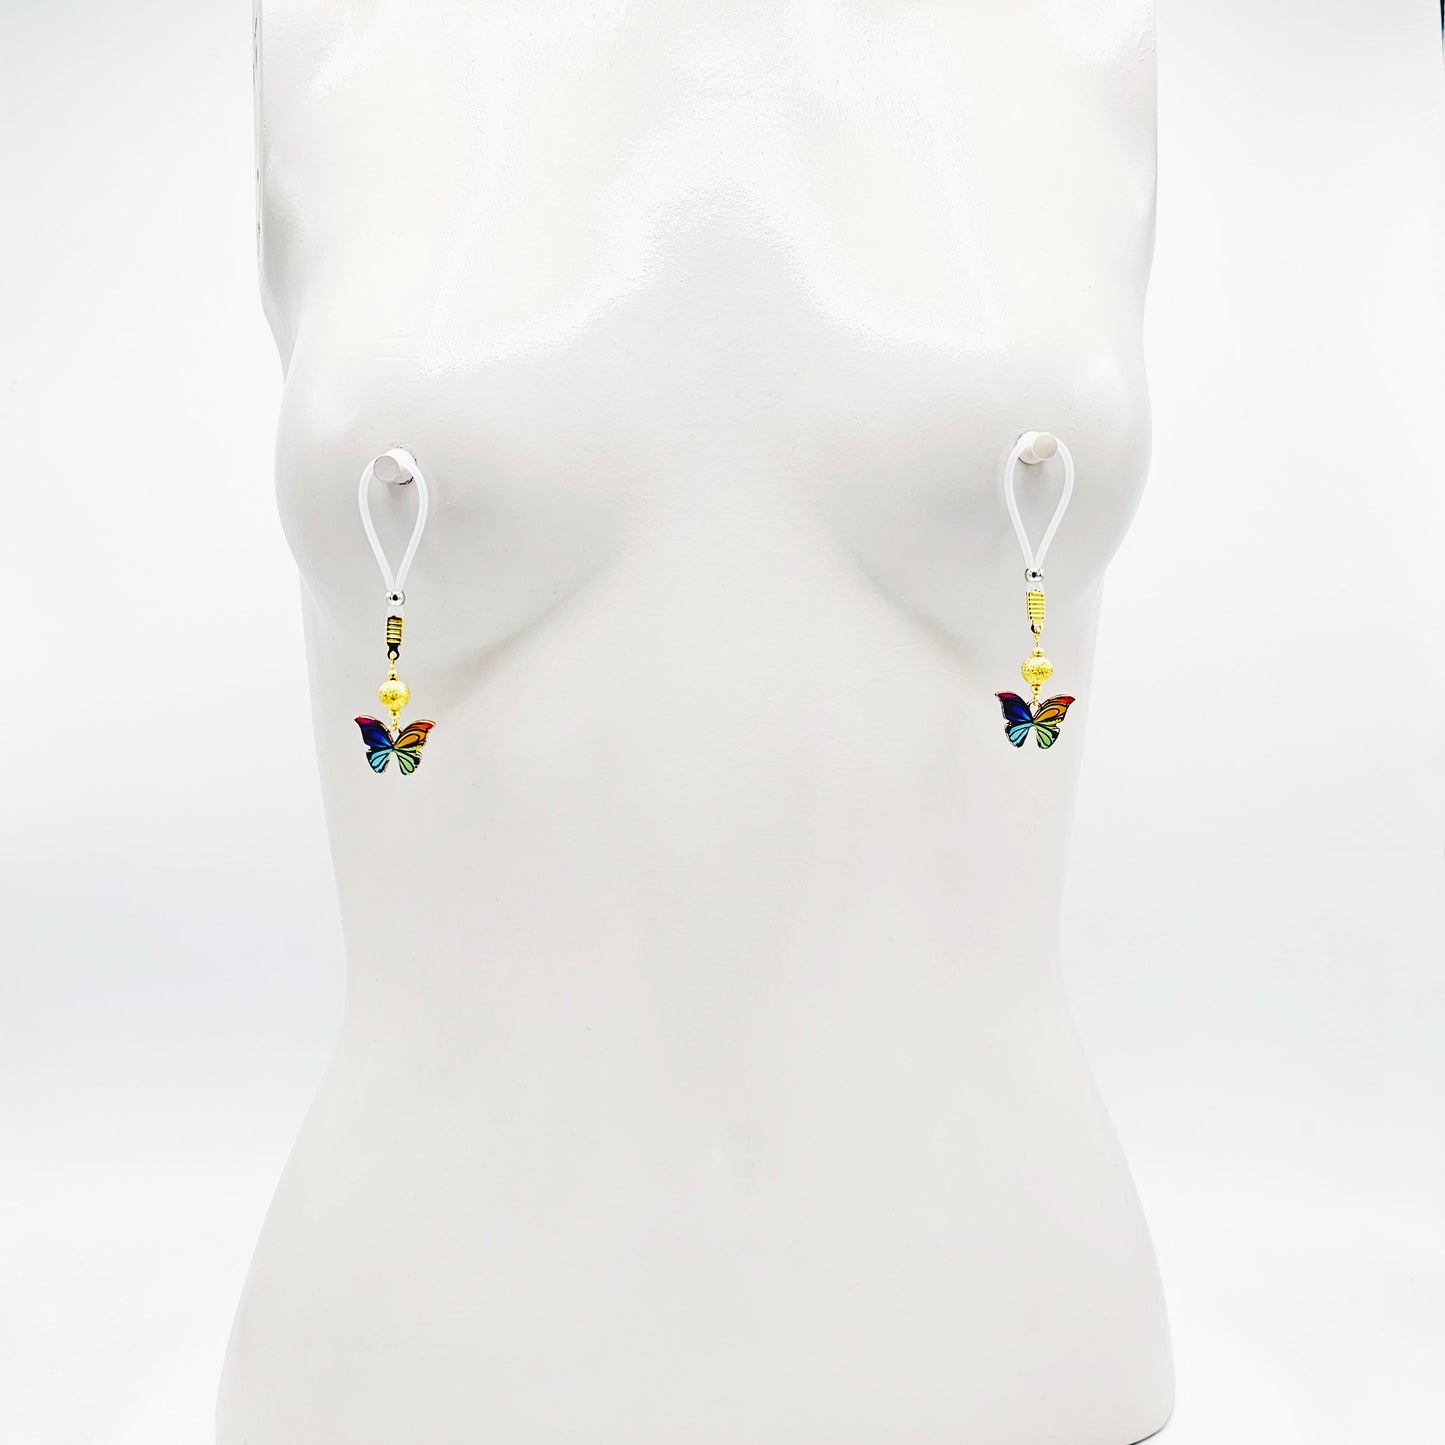 Nipple and Clitoral Jewelry Set with Butterflies, Non-Piercing. Your Choice of Butterfly and Nipple Nooses or Clamps.